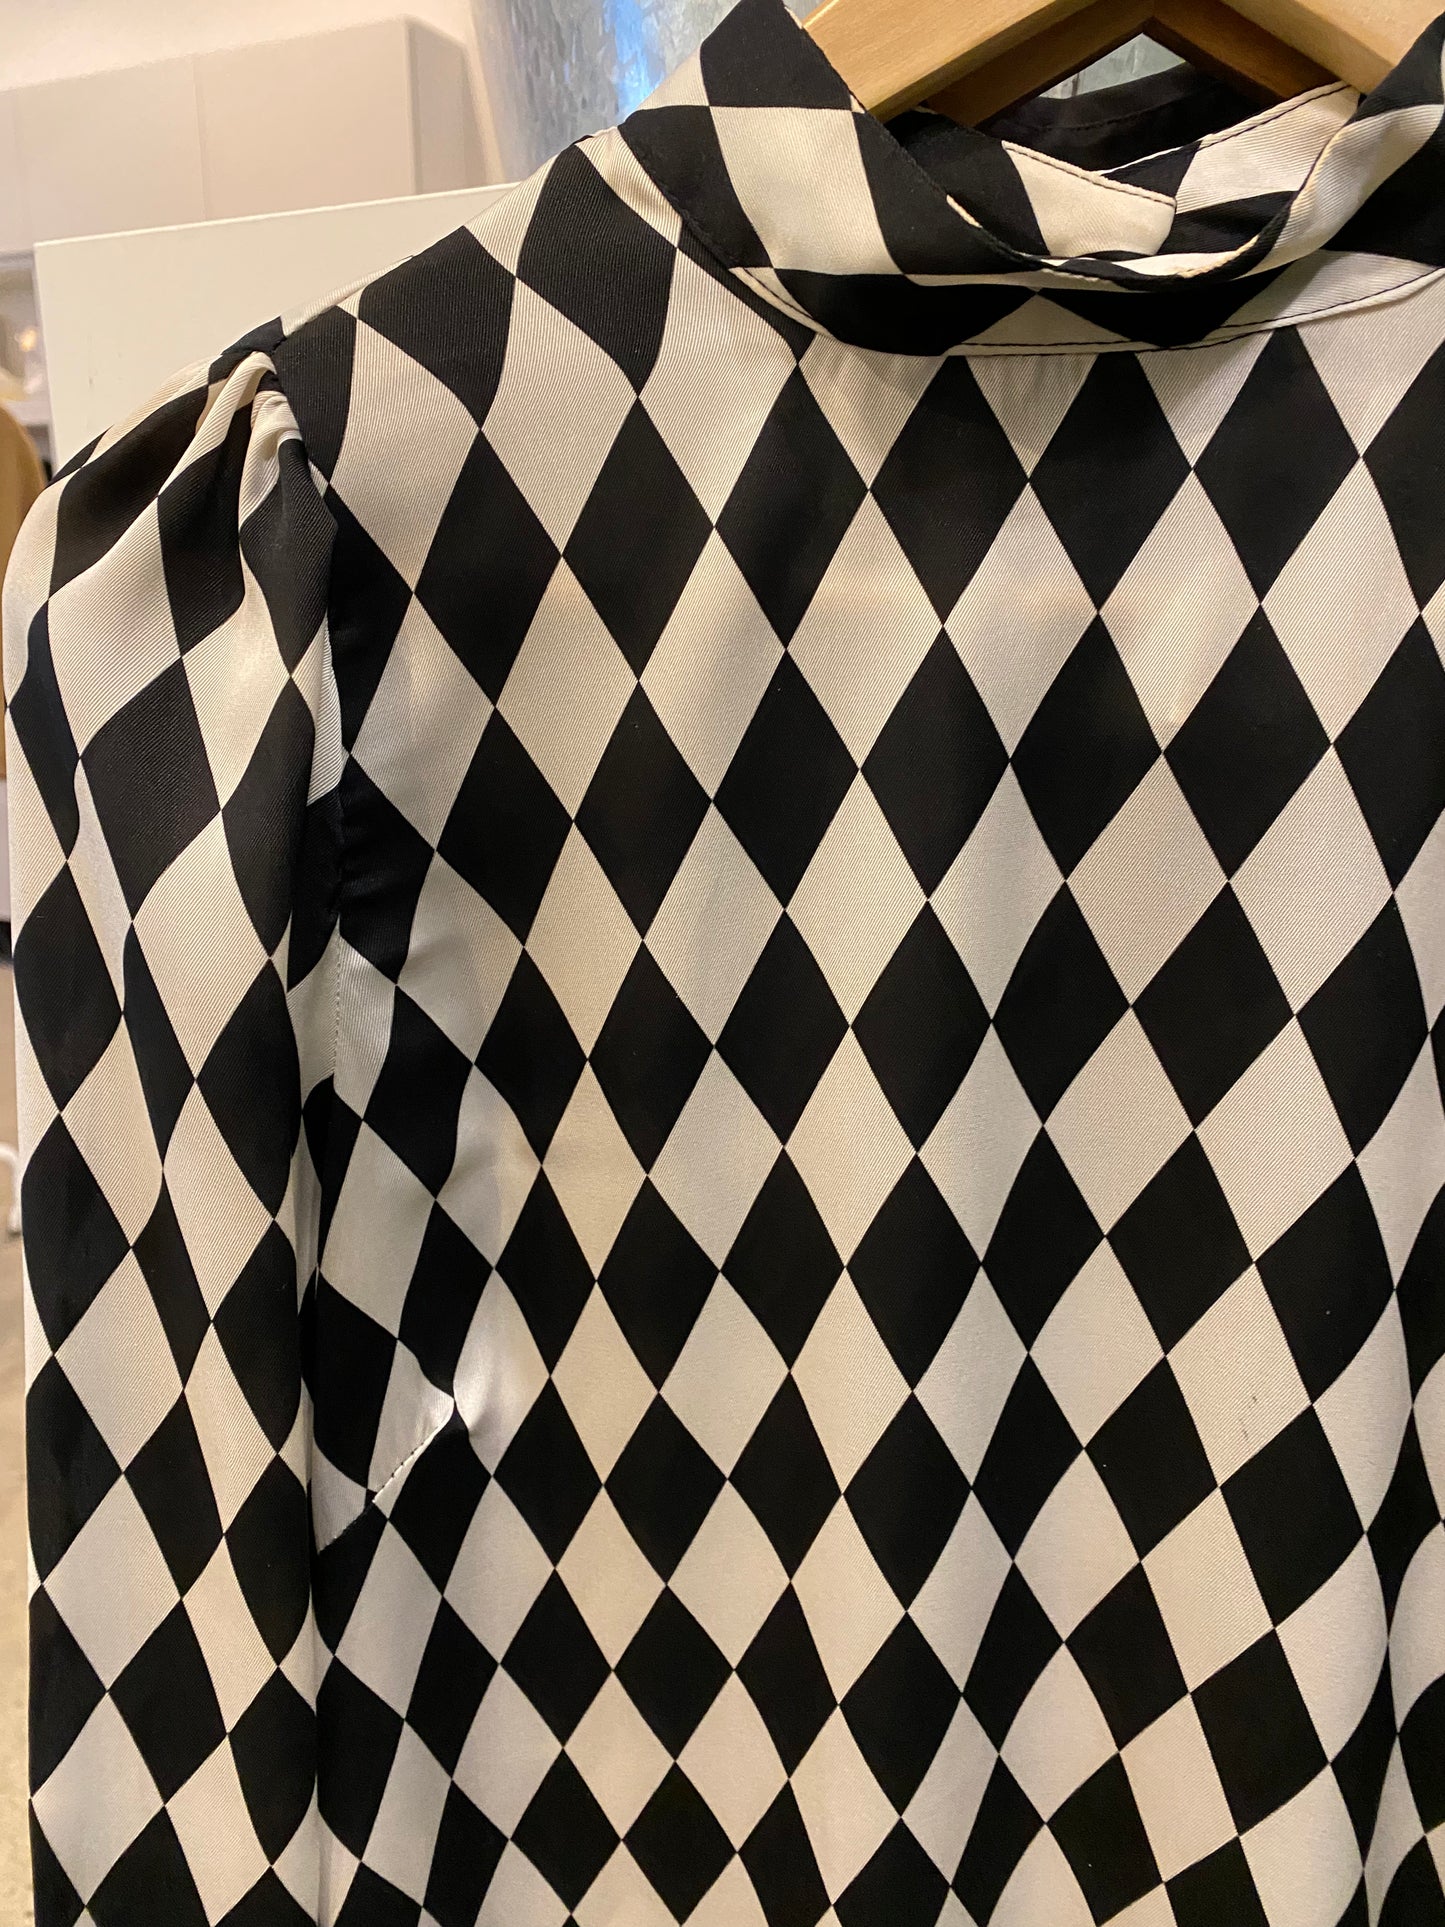 Consignment 2429-01 Dixie Black and white blouse 100% poly sz M